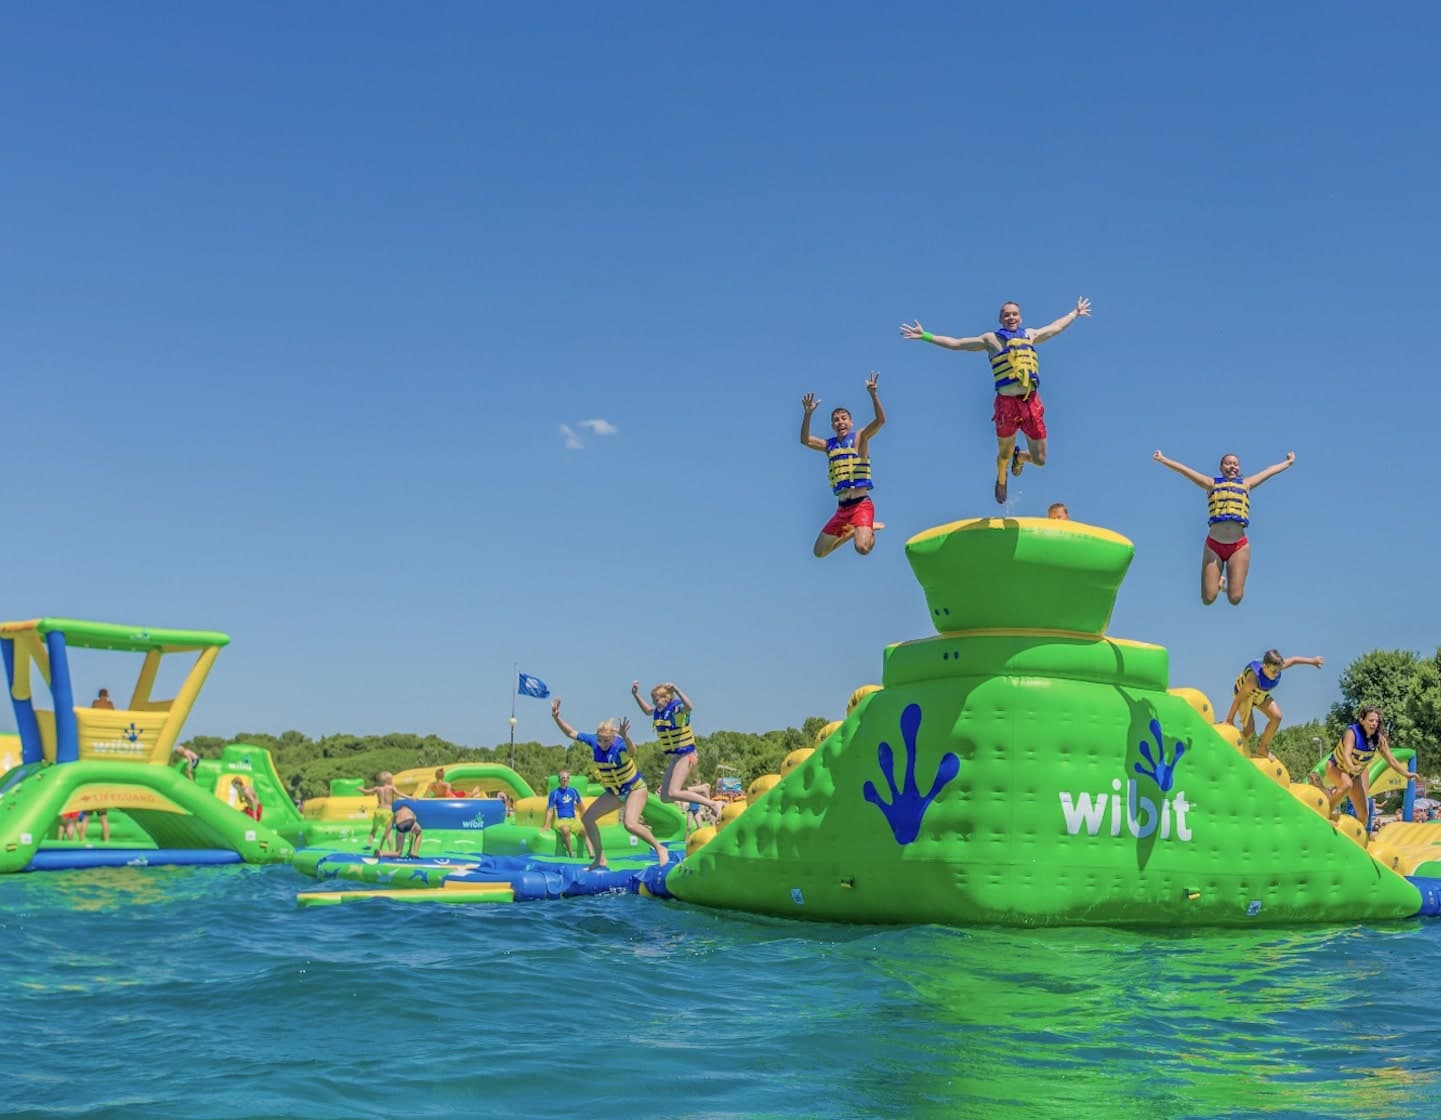 Kids activities in Singapore for small kids and teens - visit HydroDash singapore floating obstacle water park in Sentosa